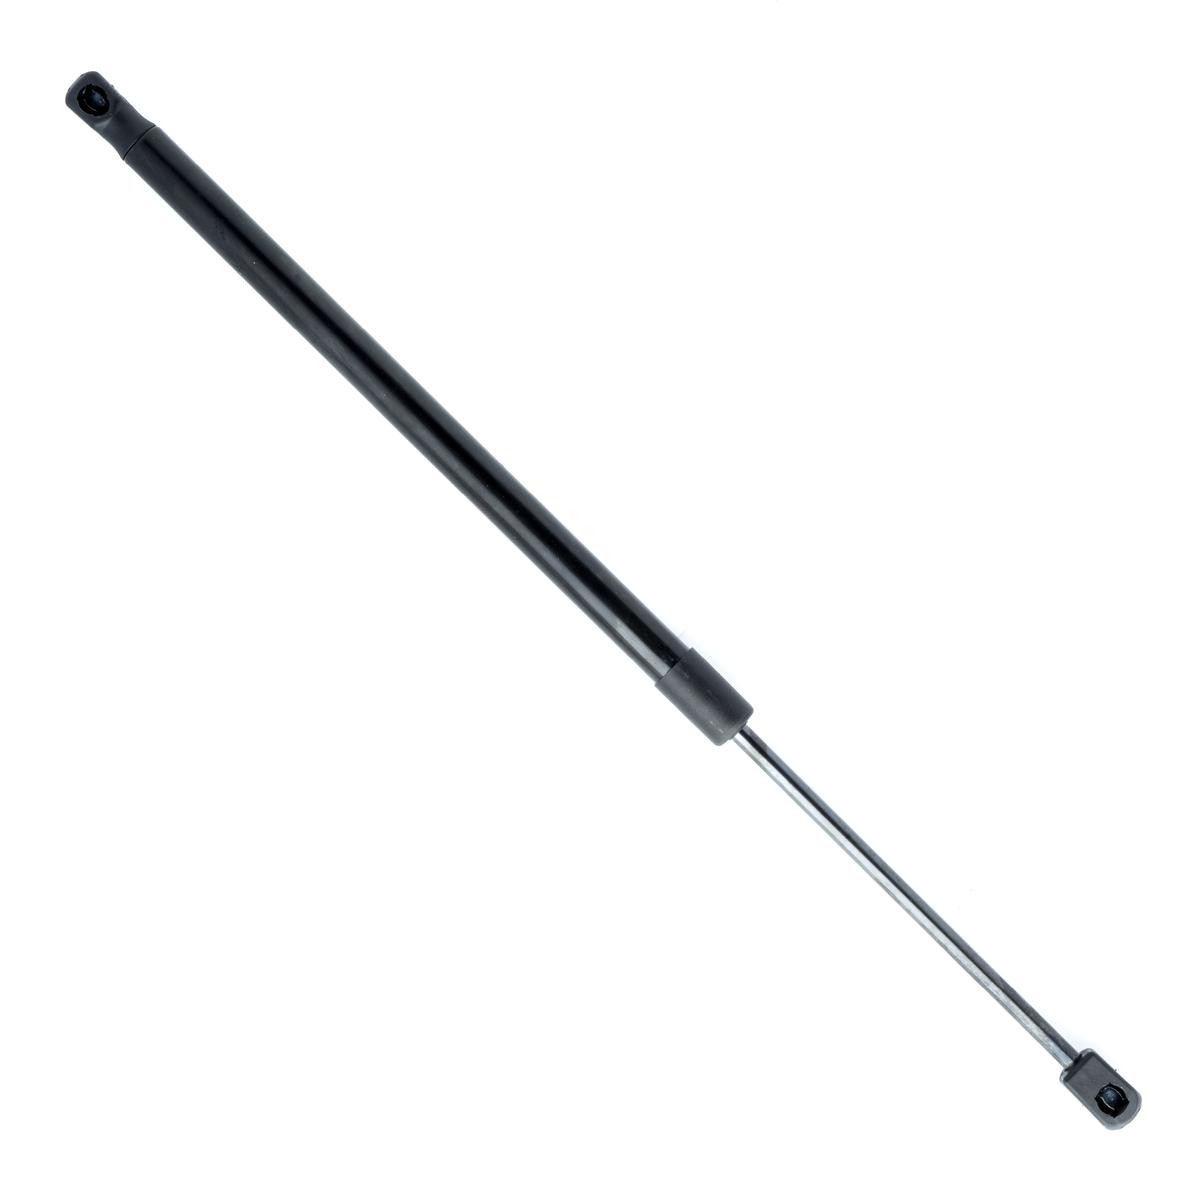 EINPARTS 665N, 519 mm Stroke: 174mm Gas spring, boot- / cargo area EP9181GS buy